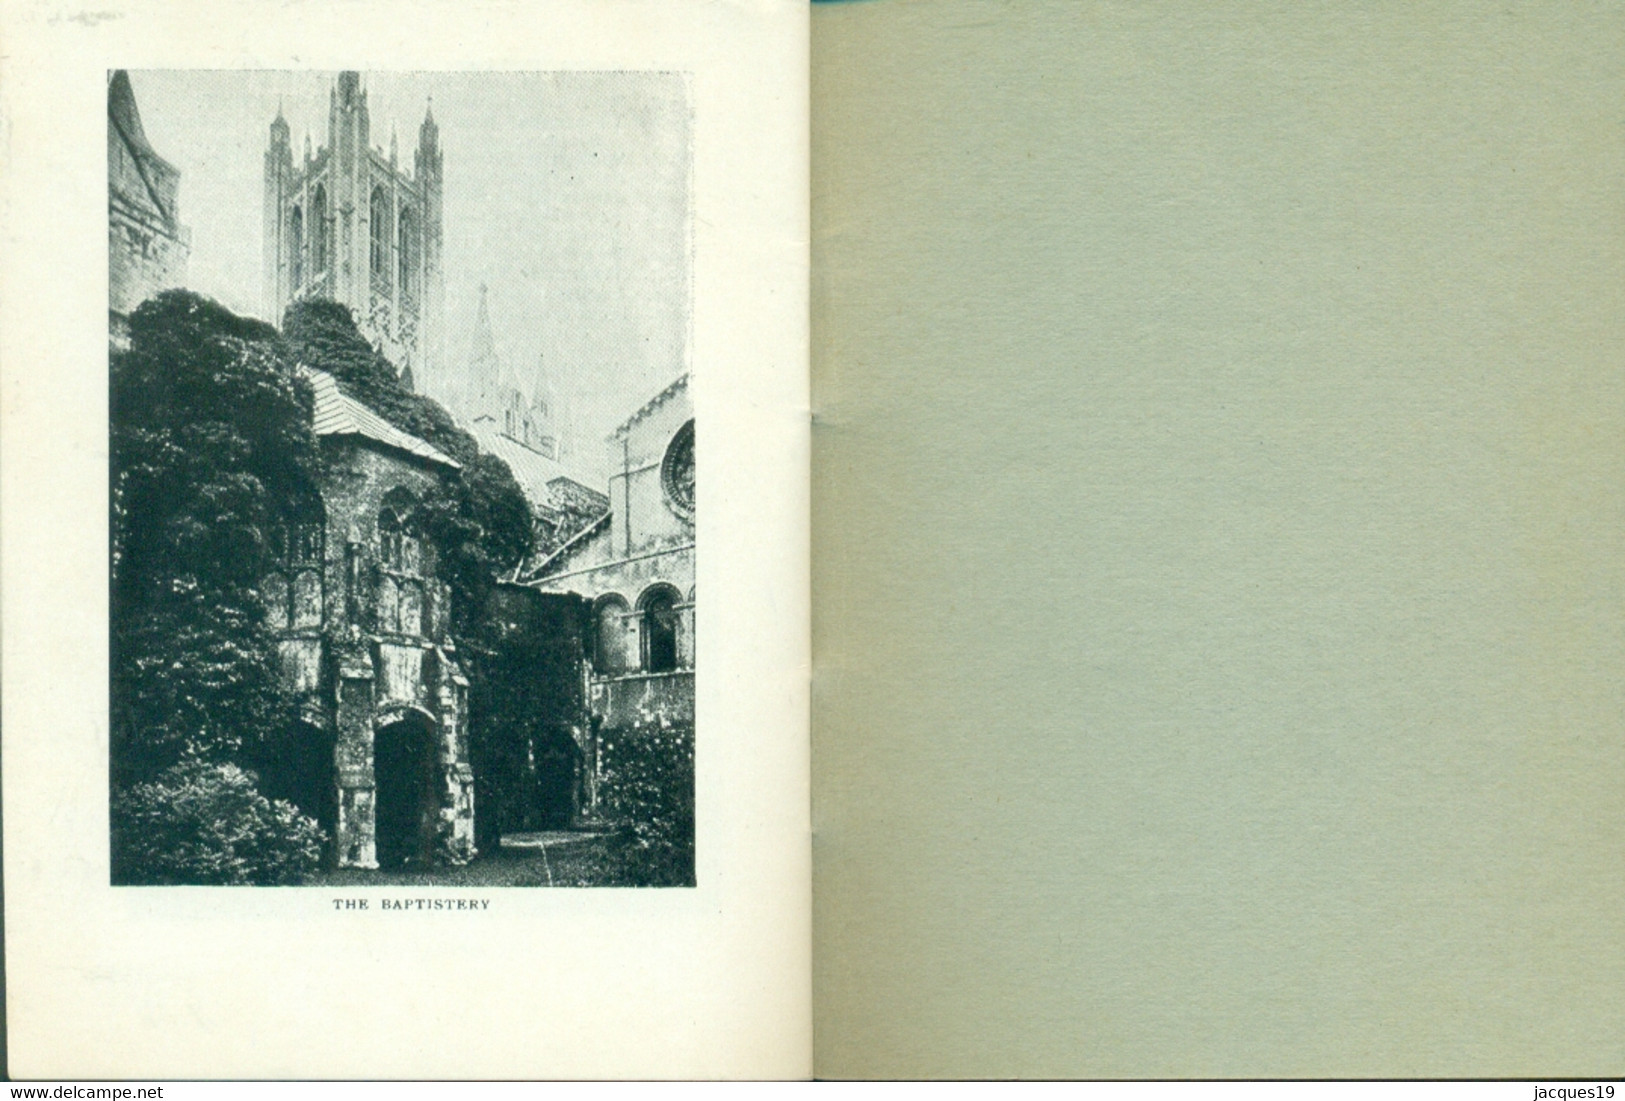 Great Britain Booklet Canterbury Notes on the Cathedrals W.H. Fairbairns S.P.C.K. London